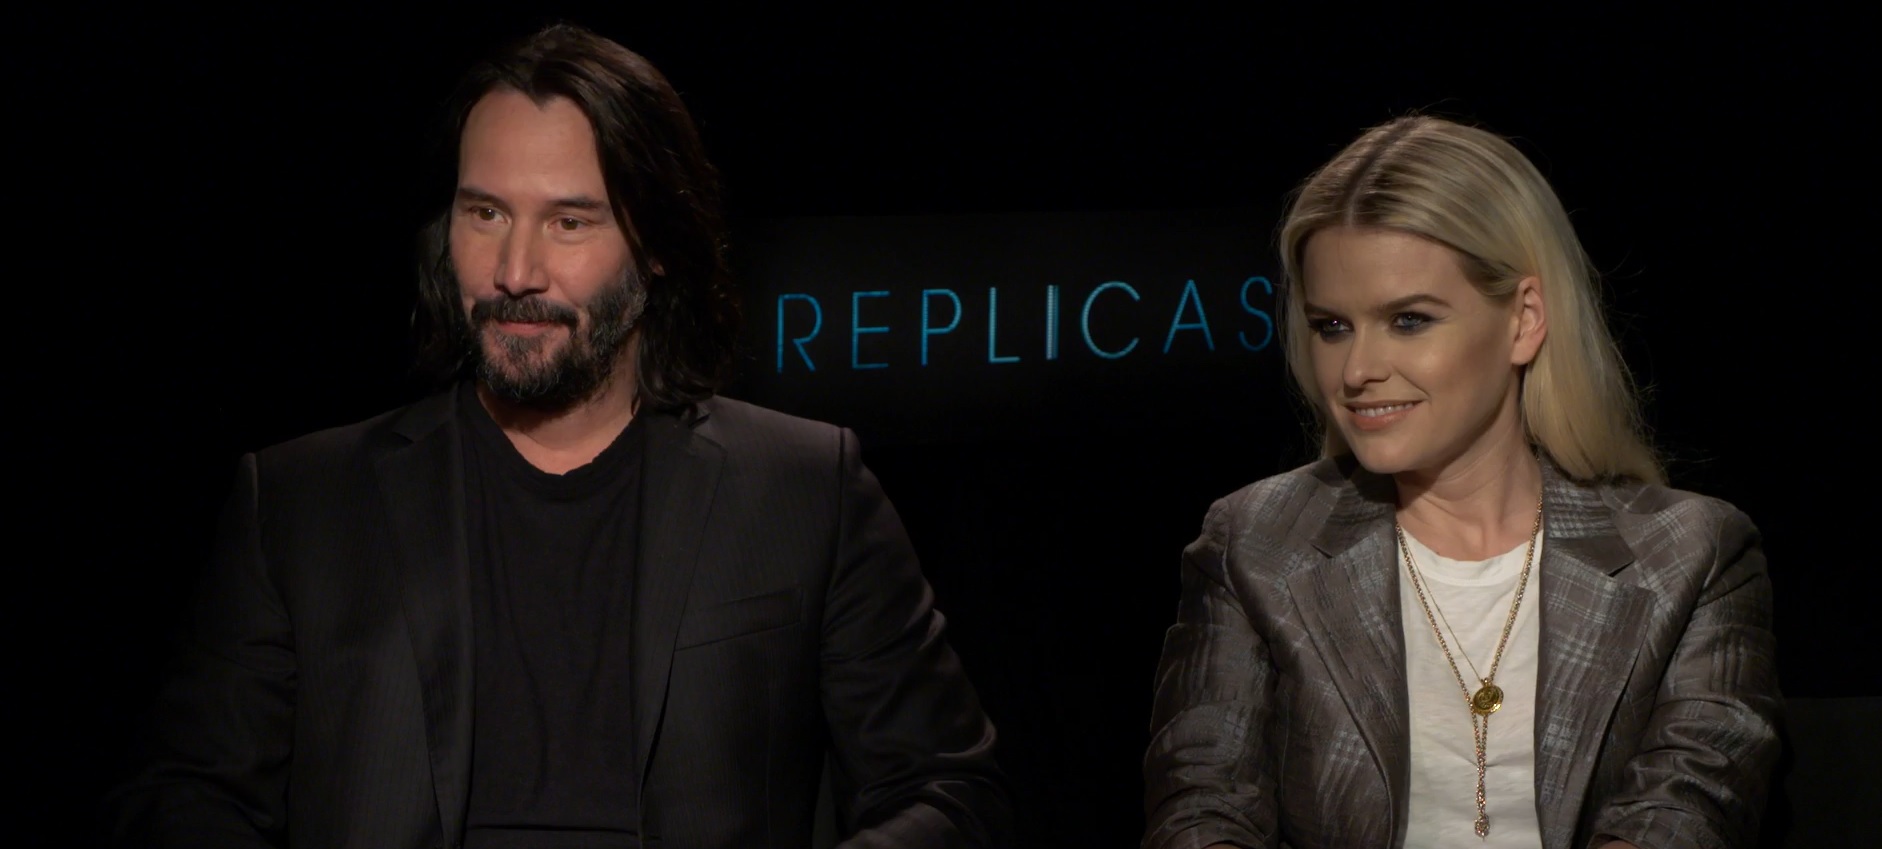 Replicas: Keanu Reeves and Alice Eve Interview